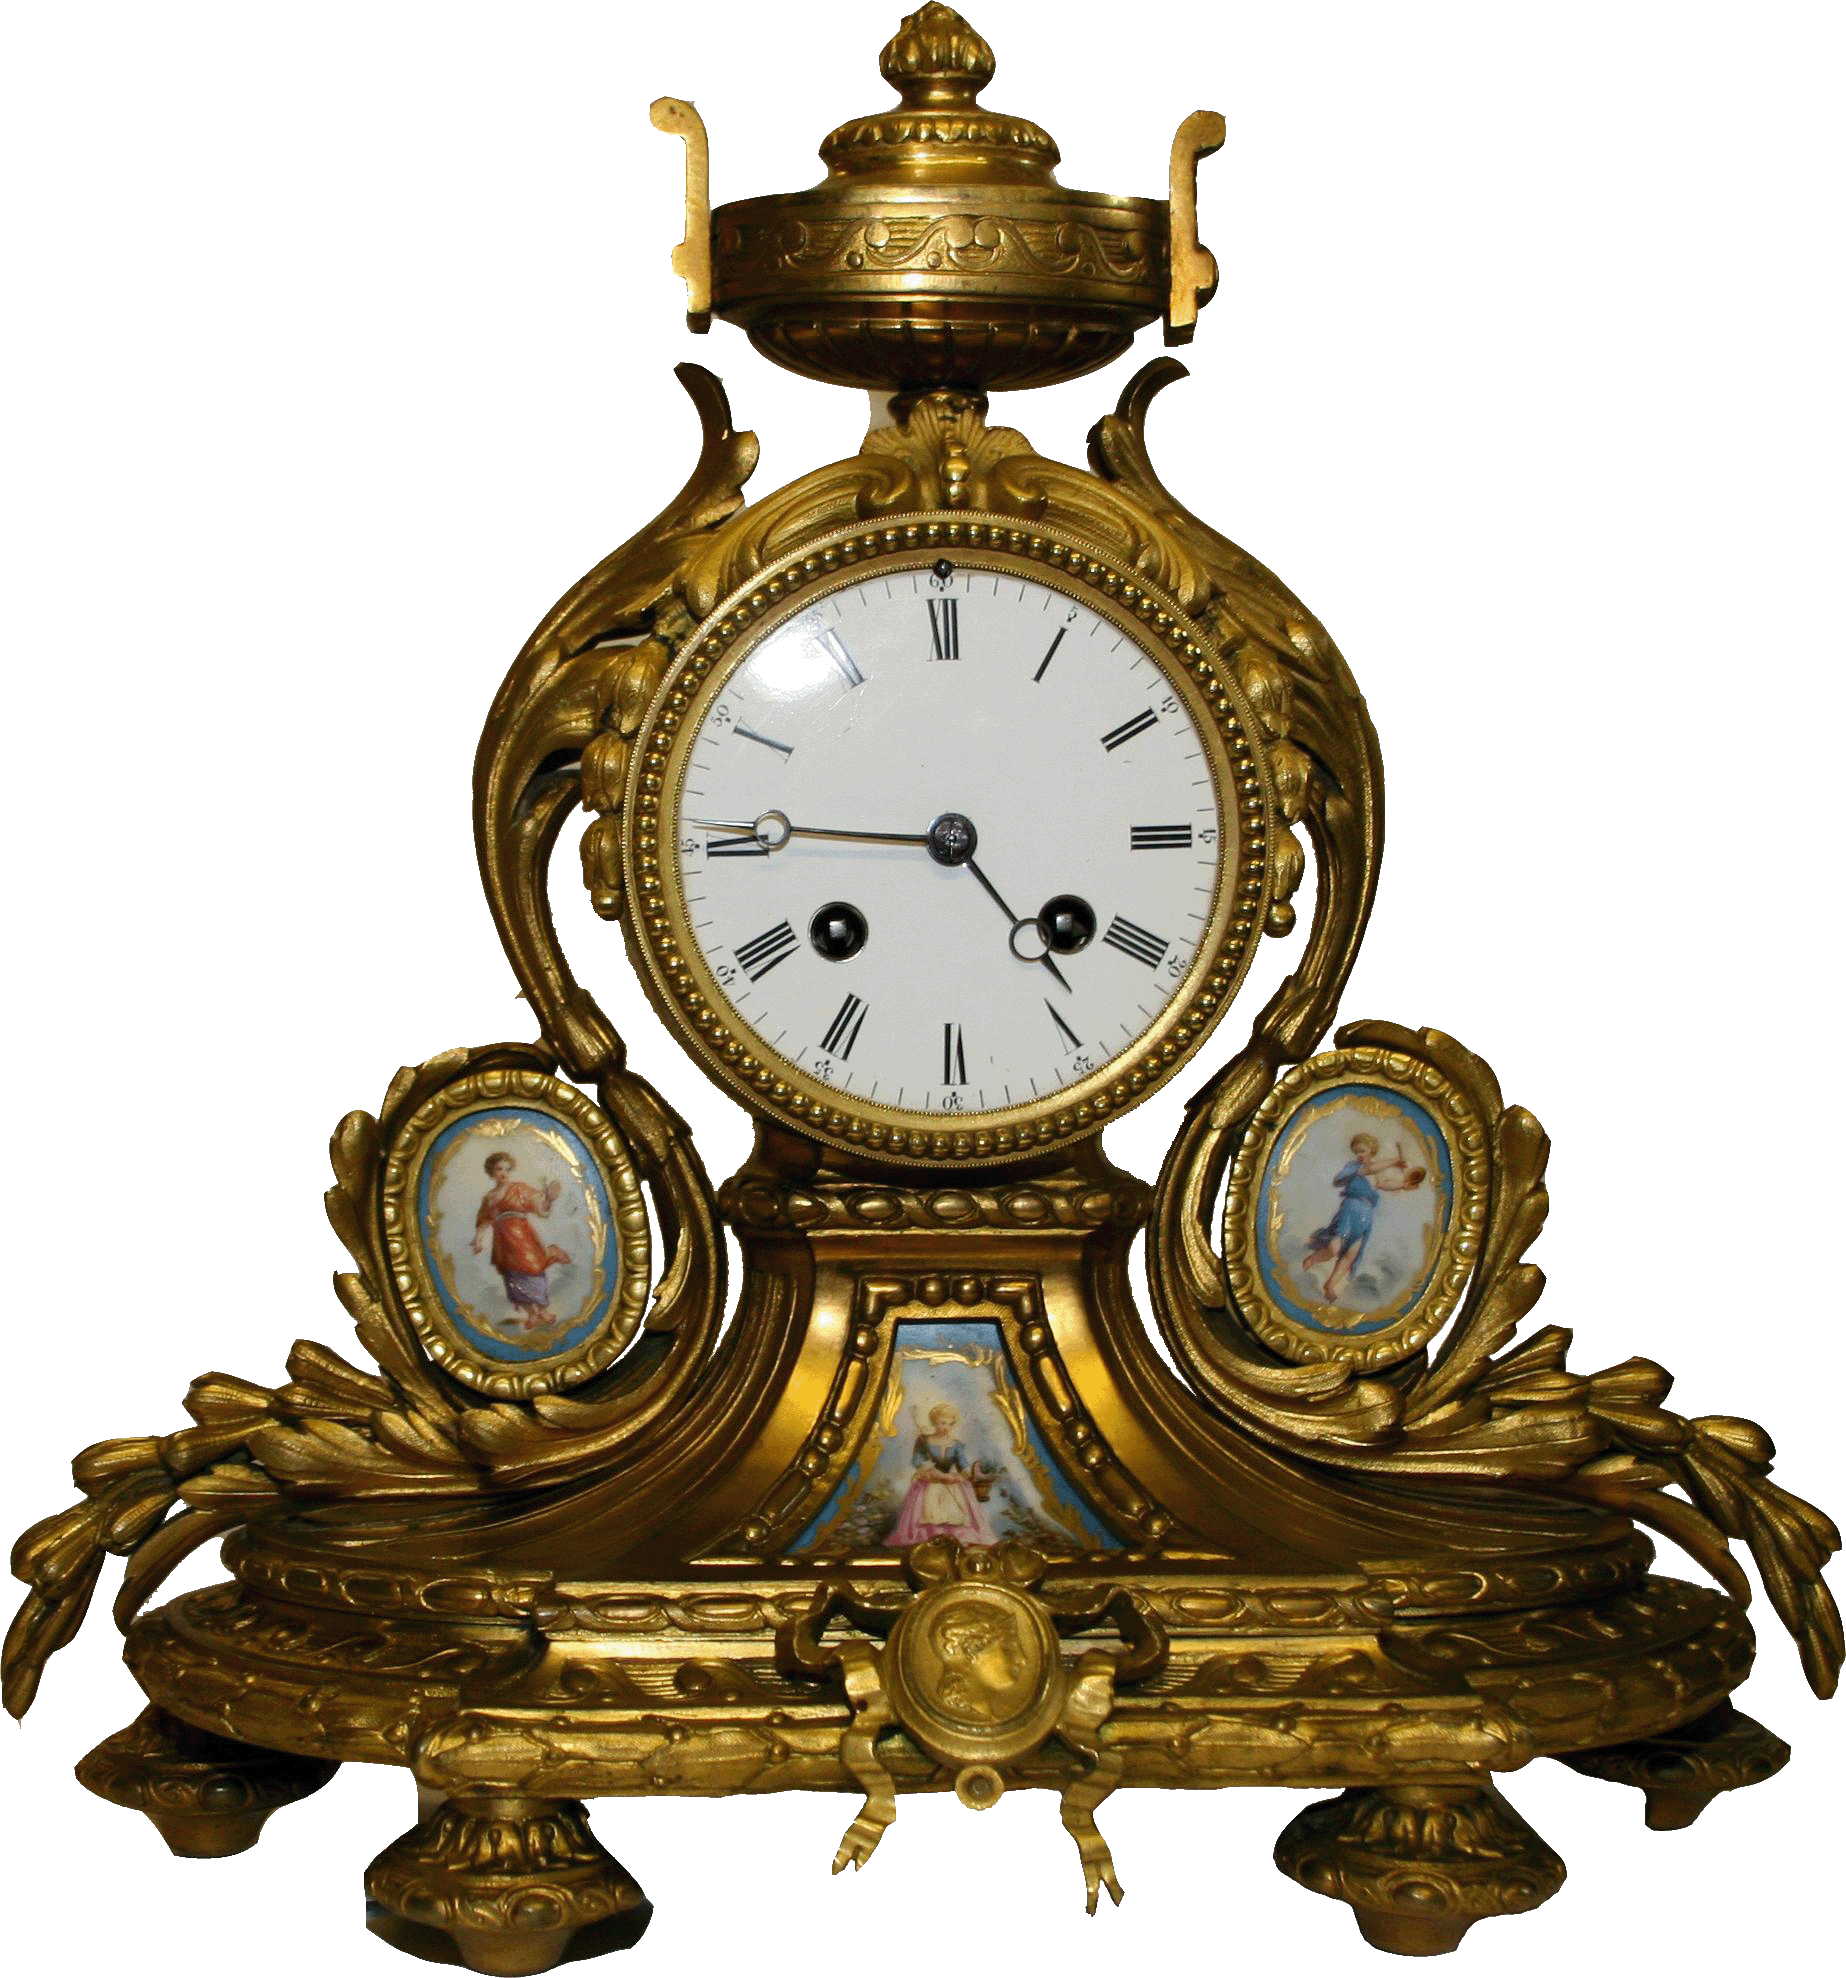 http://www.mrclock.co.uk/i/page/index/clock.gif